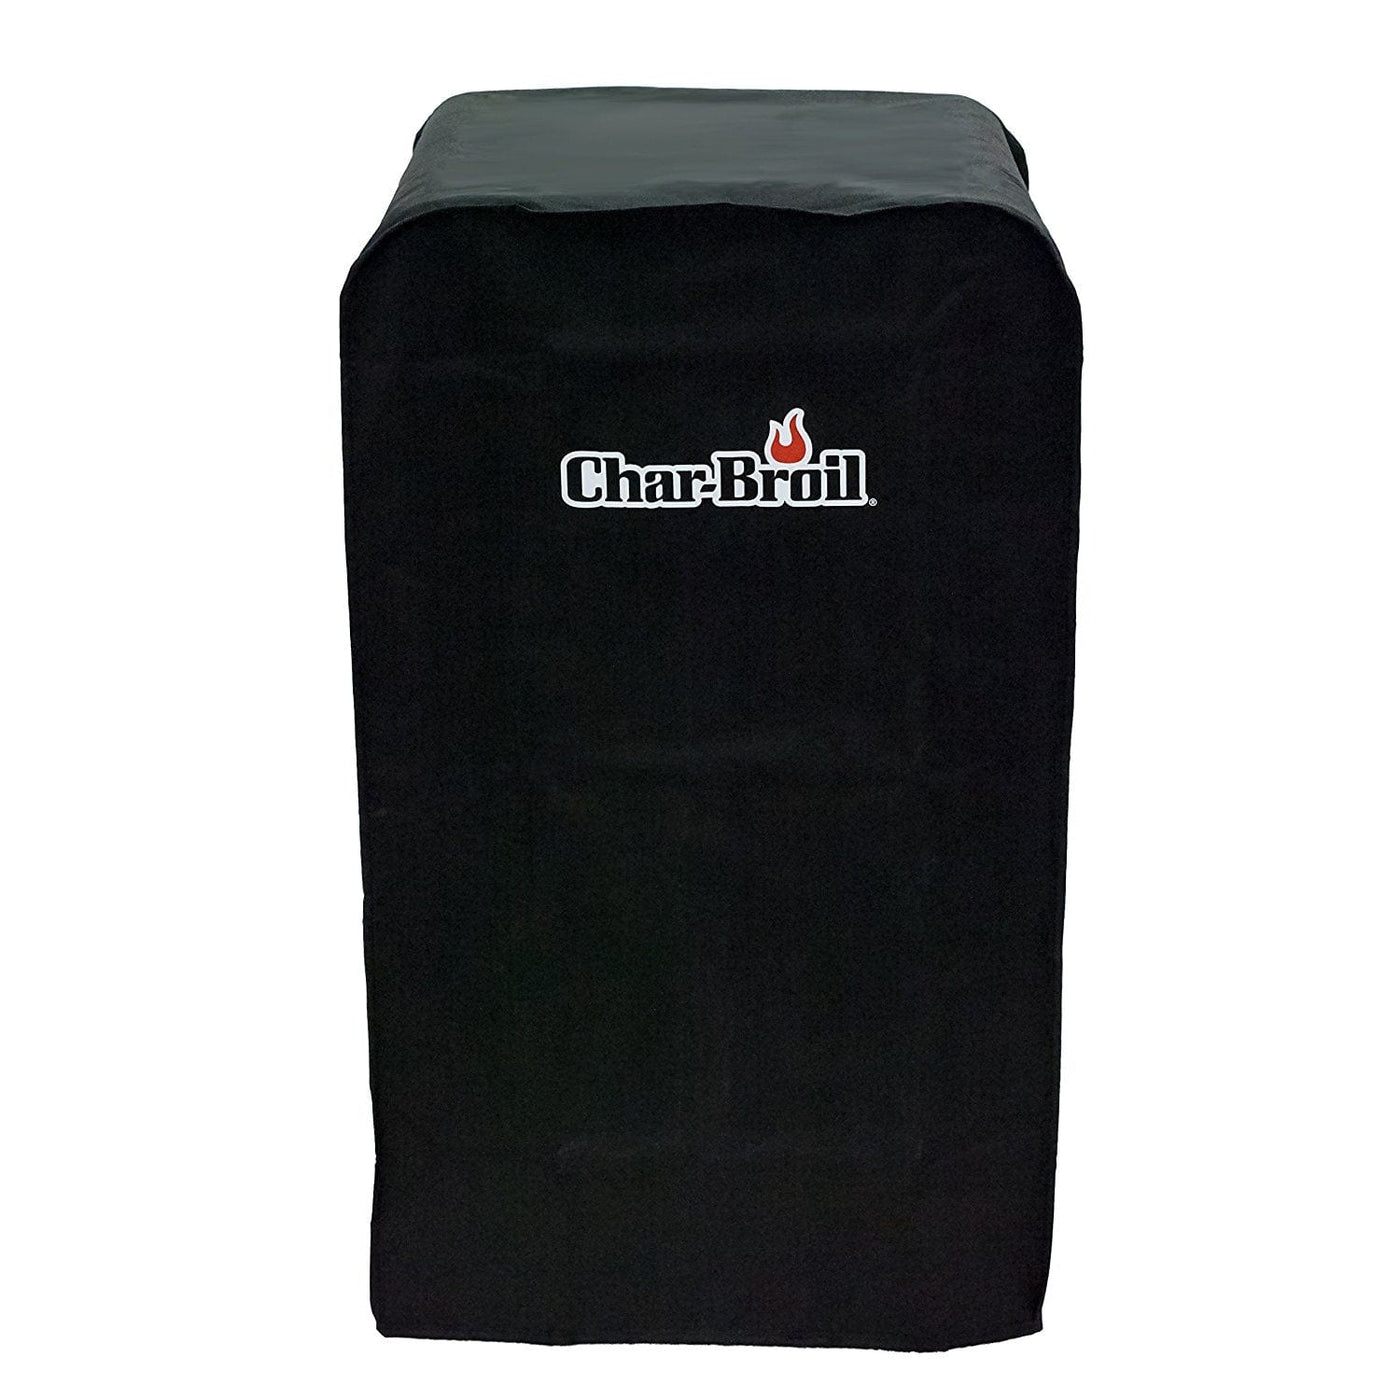 Char-Broil Char-Broil Digital Electric Smoker Cover Camping And Outdoor